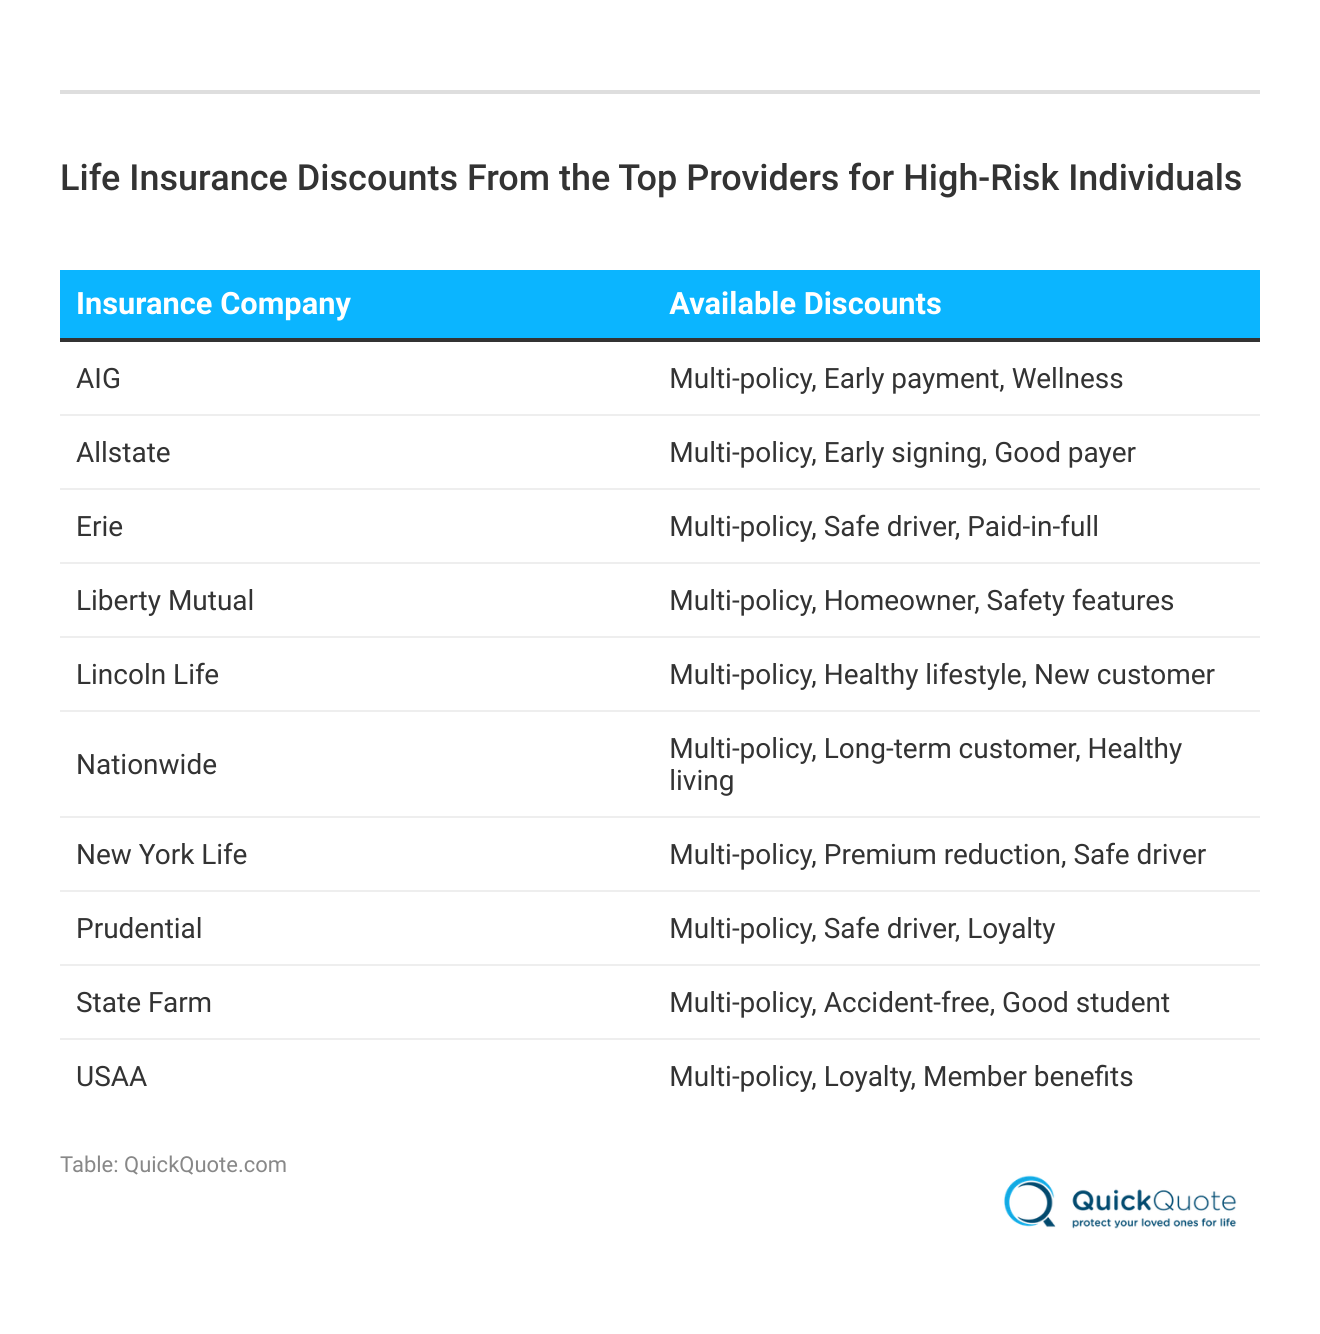 <h3>Life Insurance Discounts From the Top Providers for High-Risk Individuals</h3>